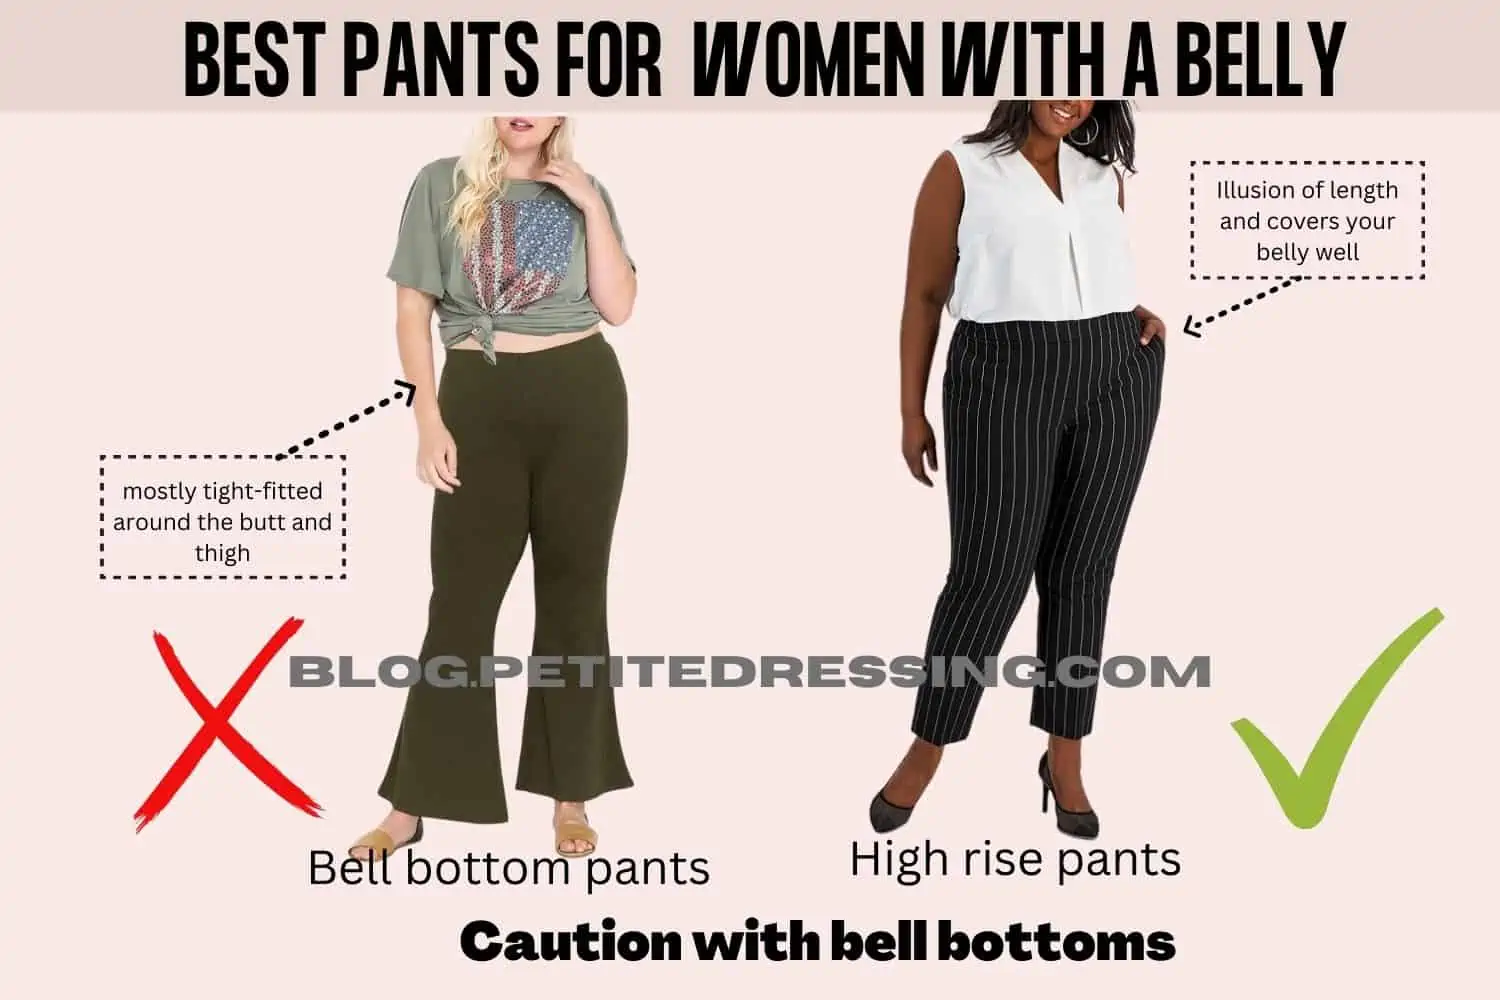 Fupa styling tip for my fupa fabulous ladies. My plus size and mid